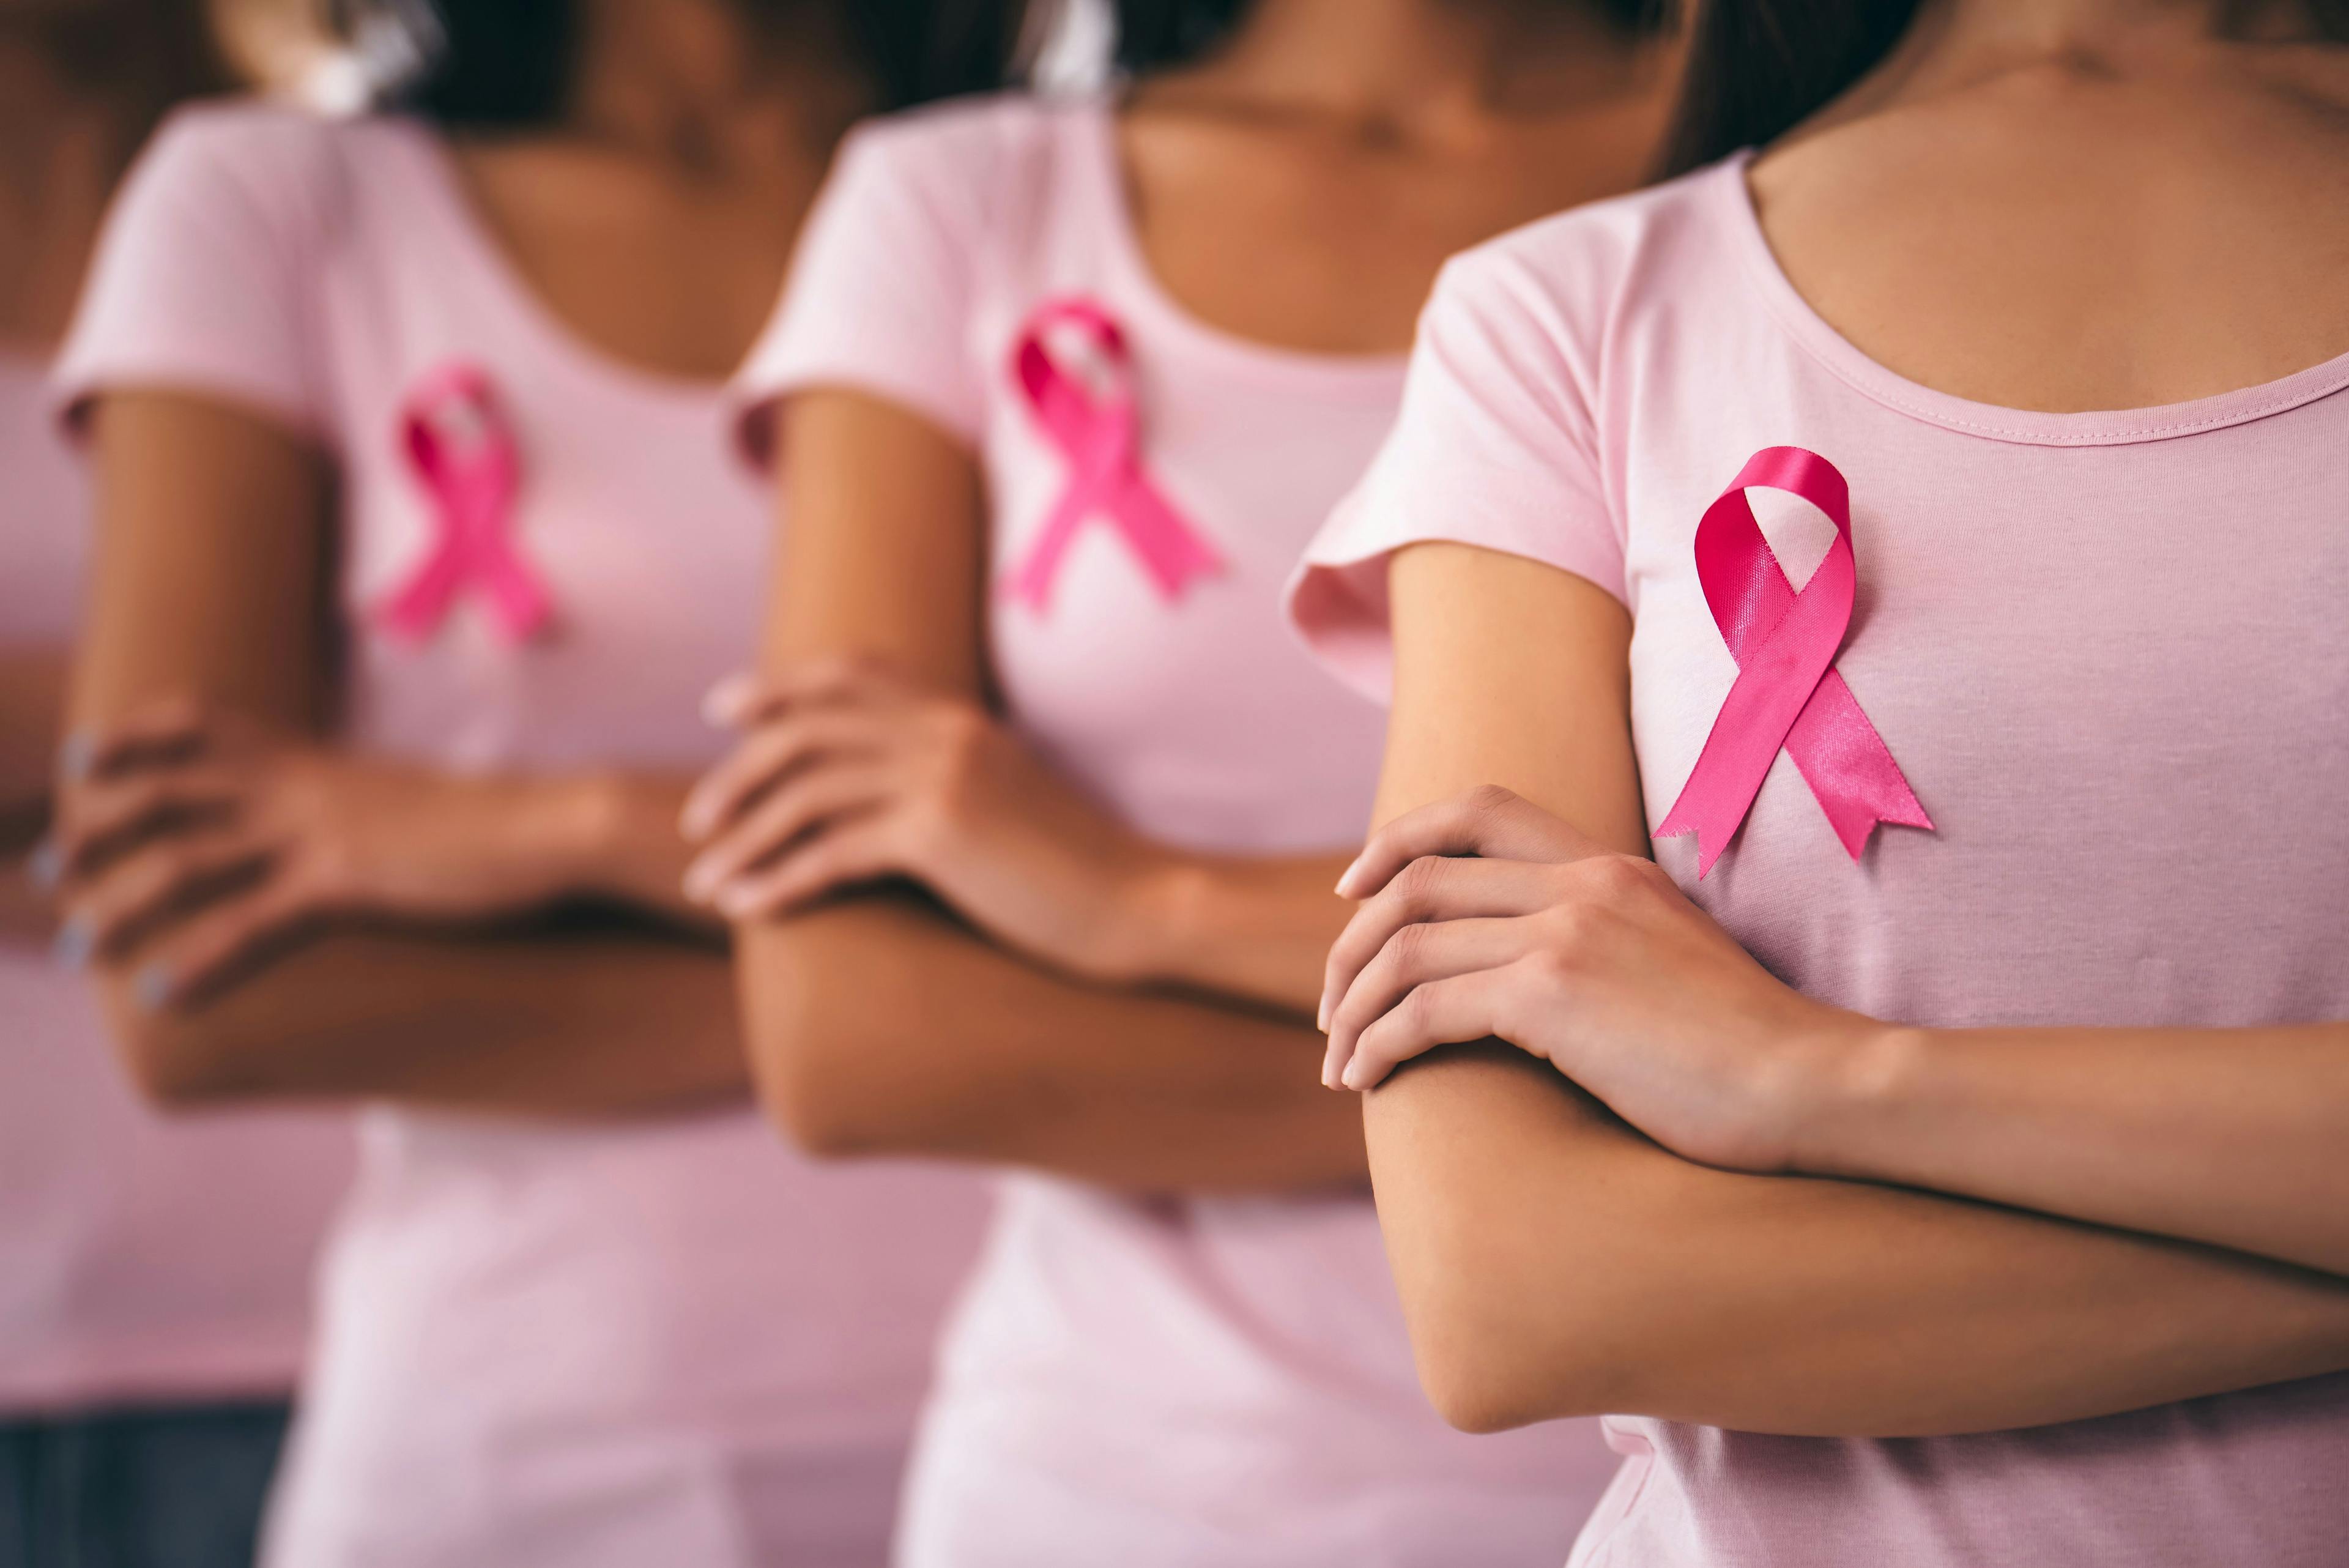 Women with breast cancer | Image credit: Vasyl - stock.adobe.com